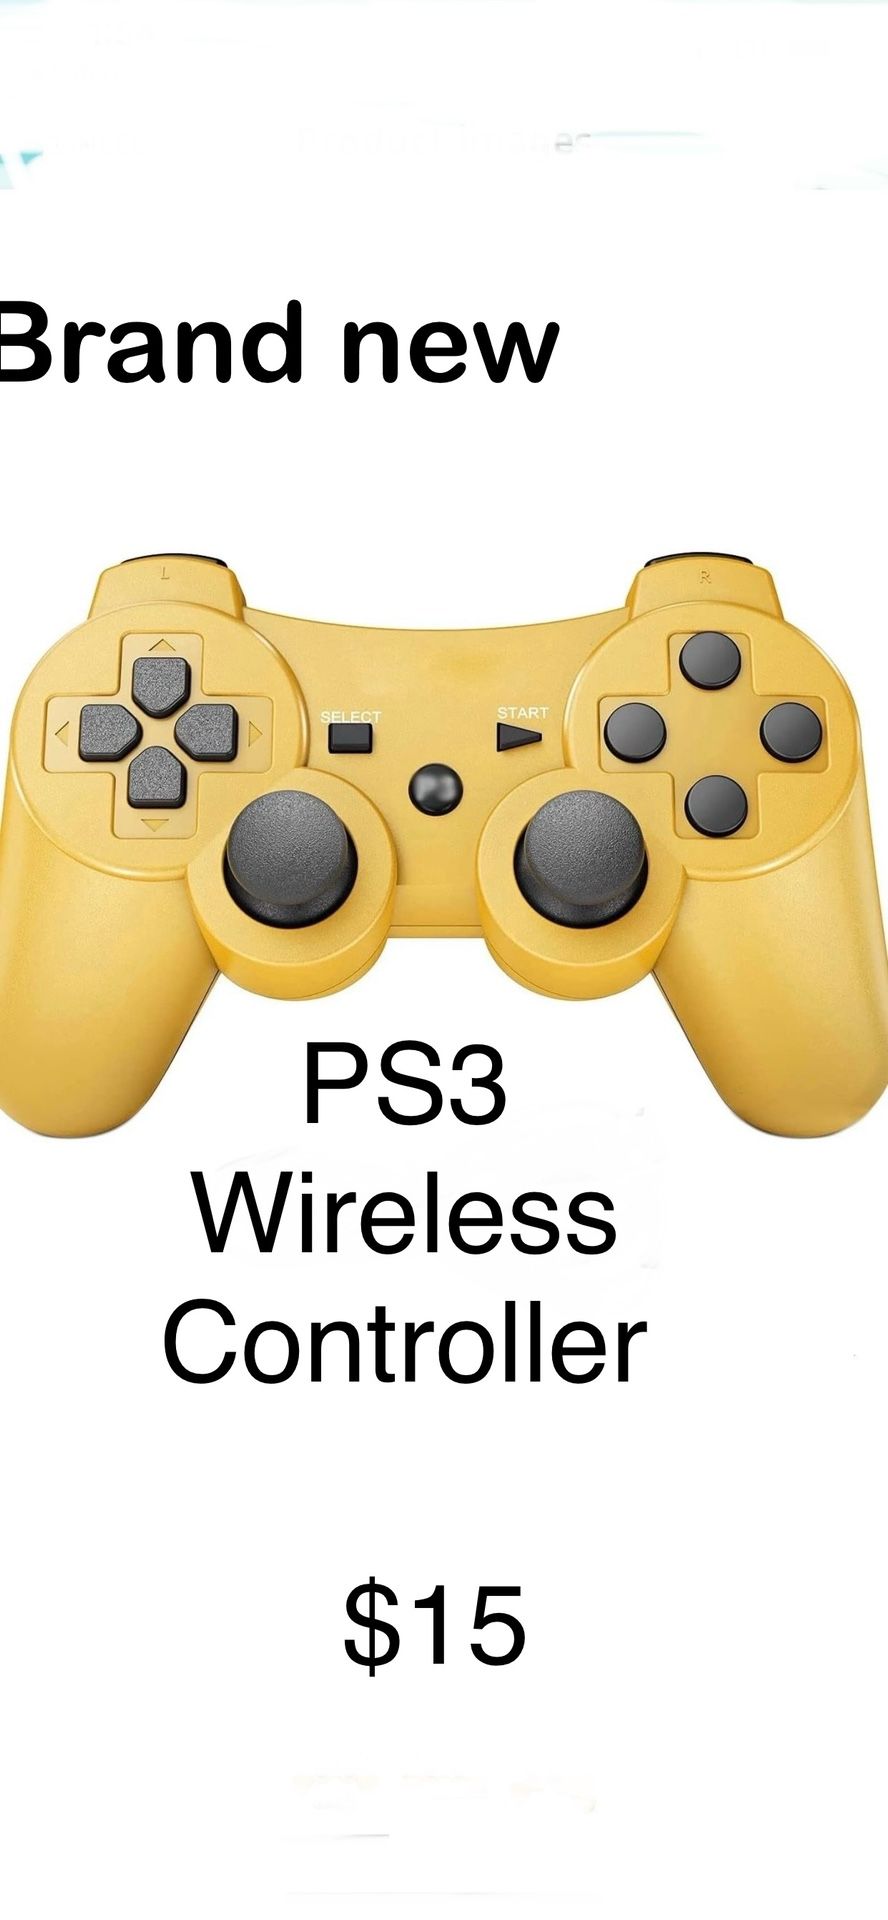 Brand New Wireless Ps3 Controller $15 Firm Price 